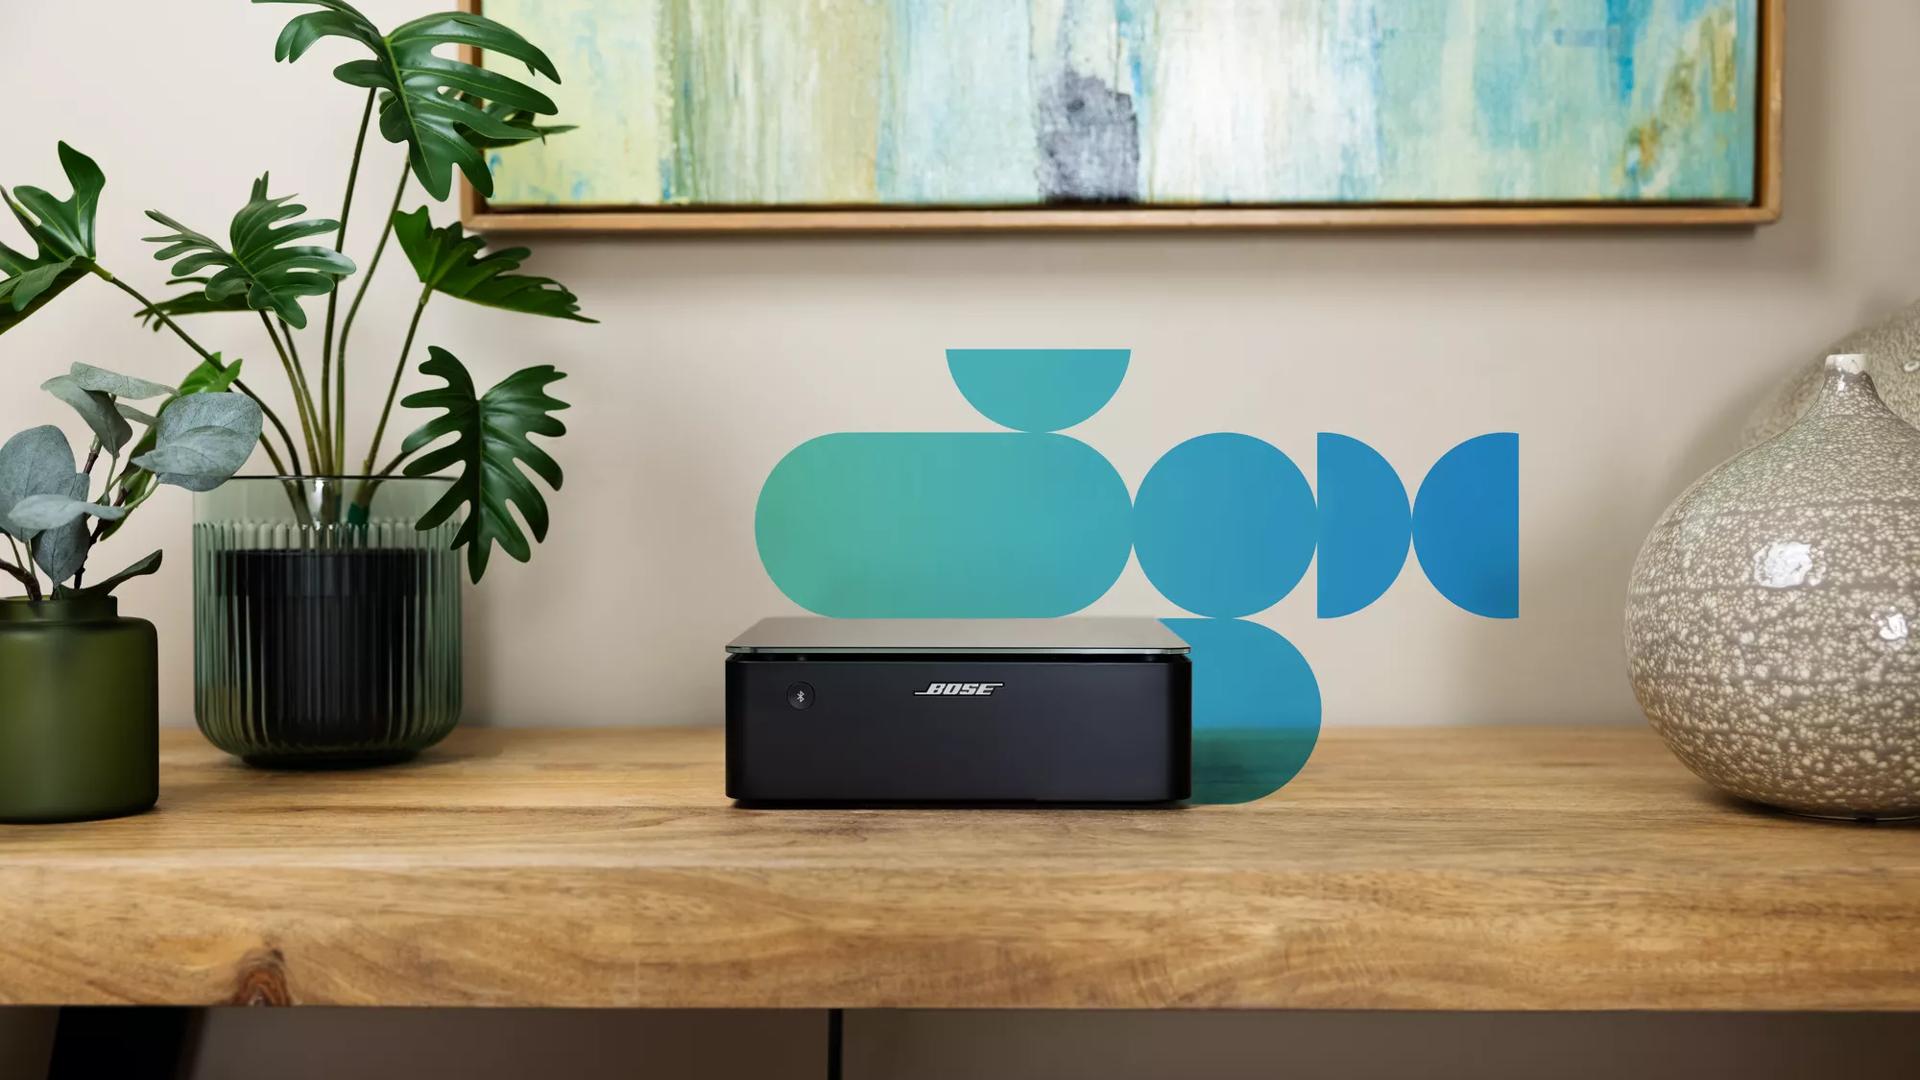 Bose Music Amplifier on a table